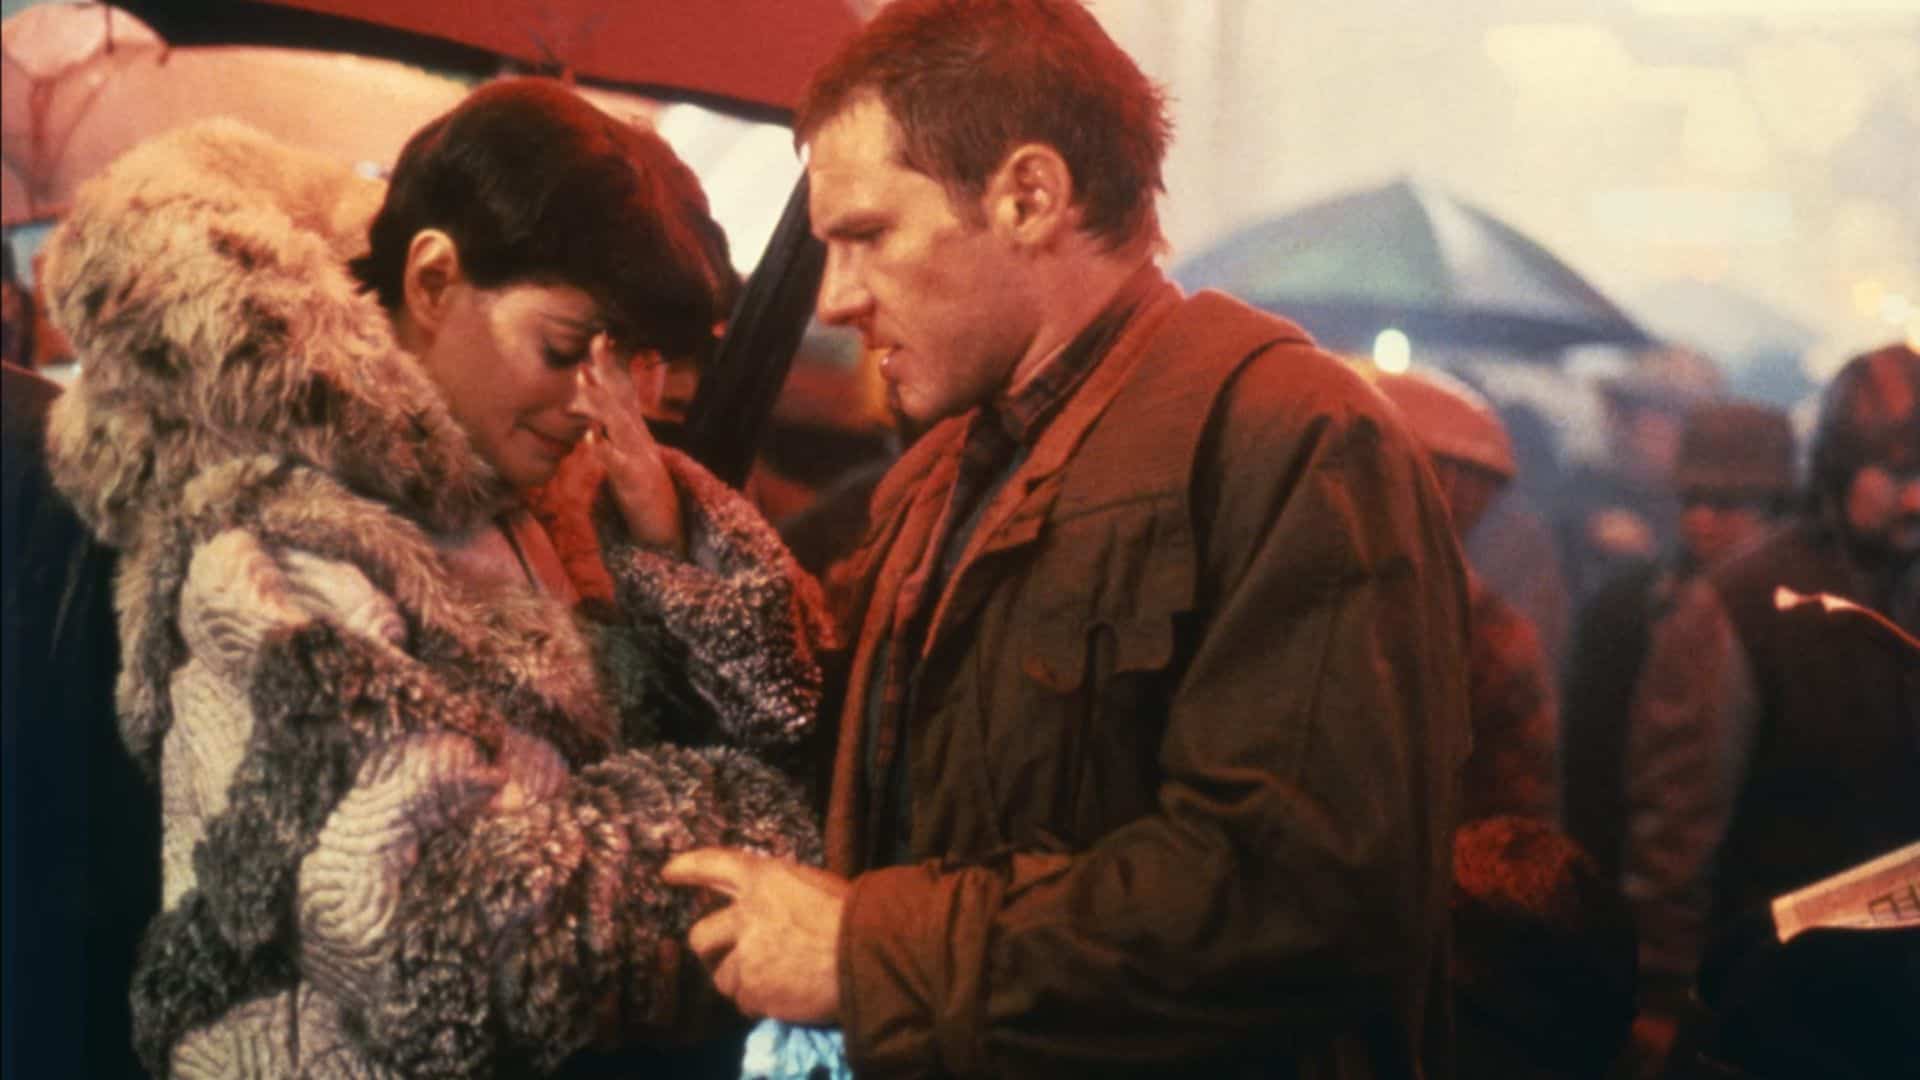 Sean Young in a fur coat standing with Harrison Ford in this image from The Ladd Company